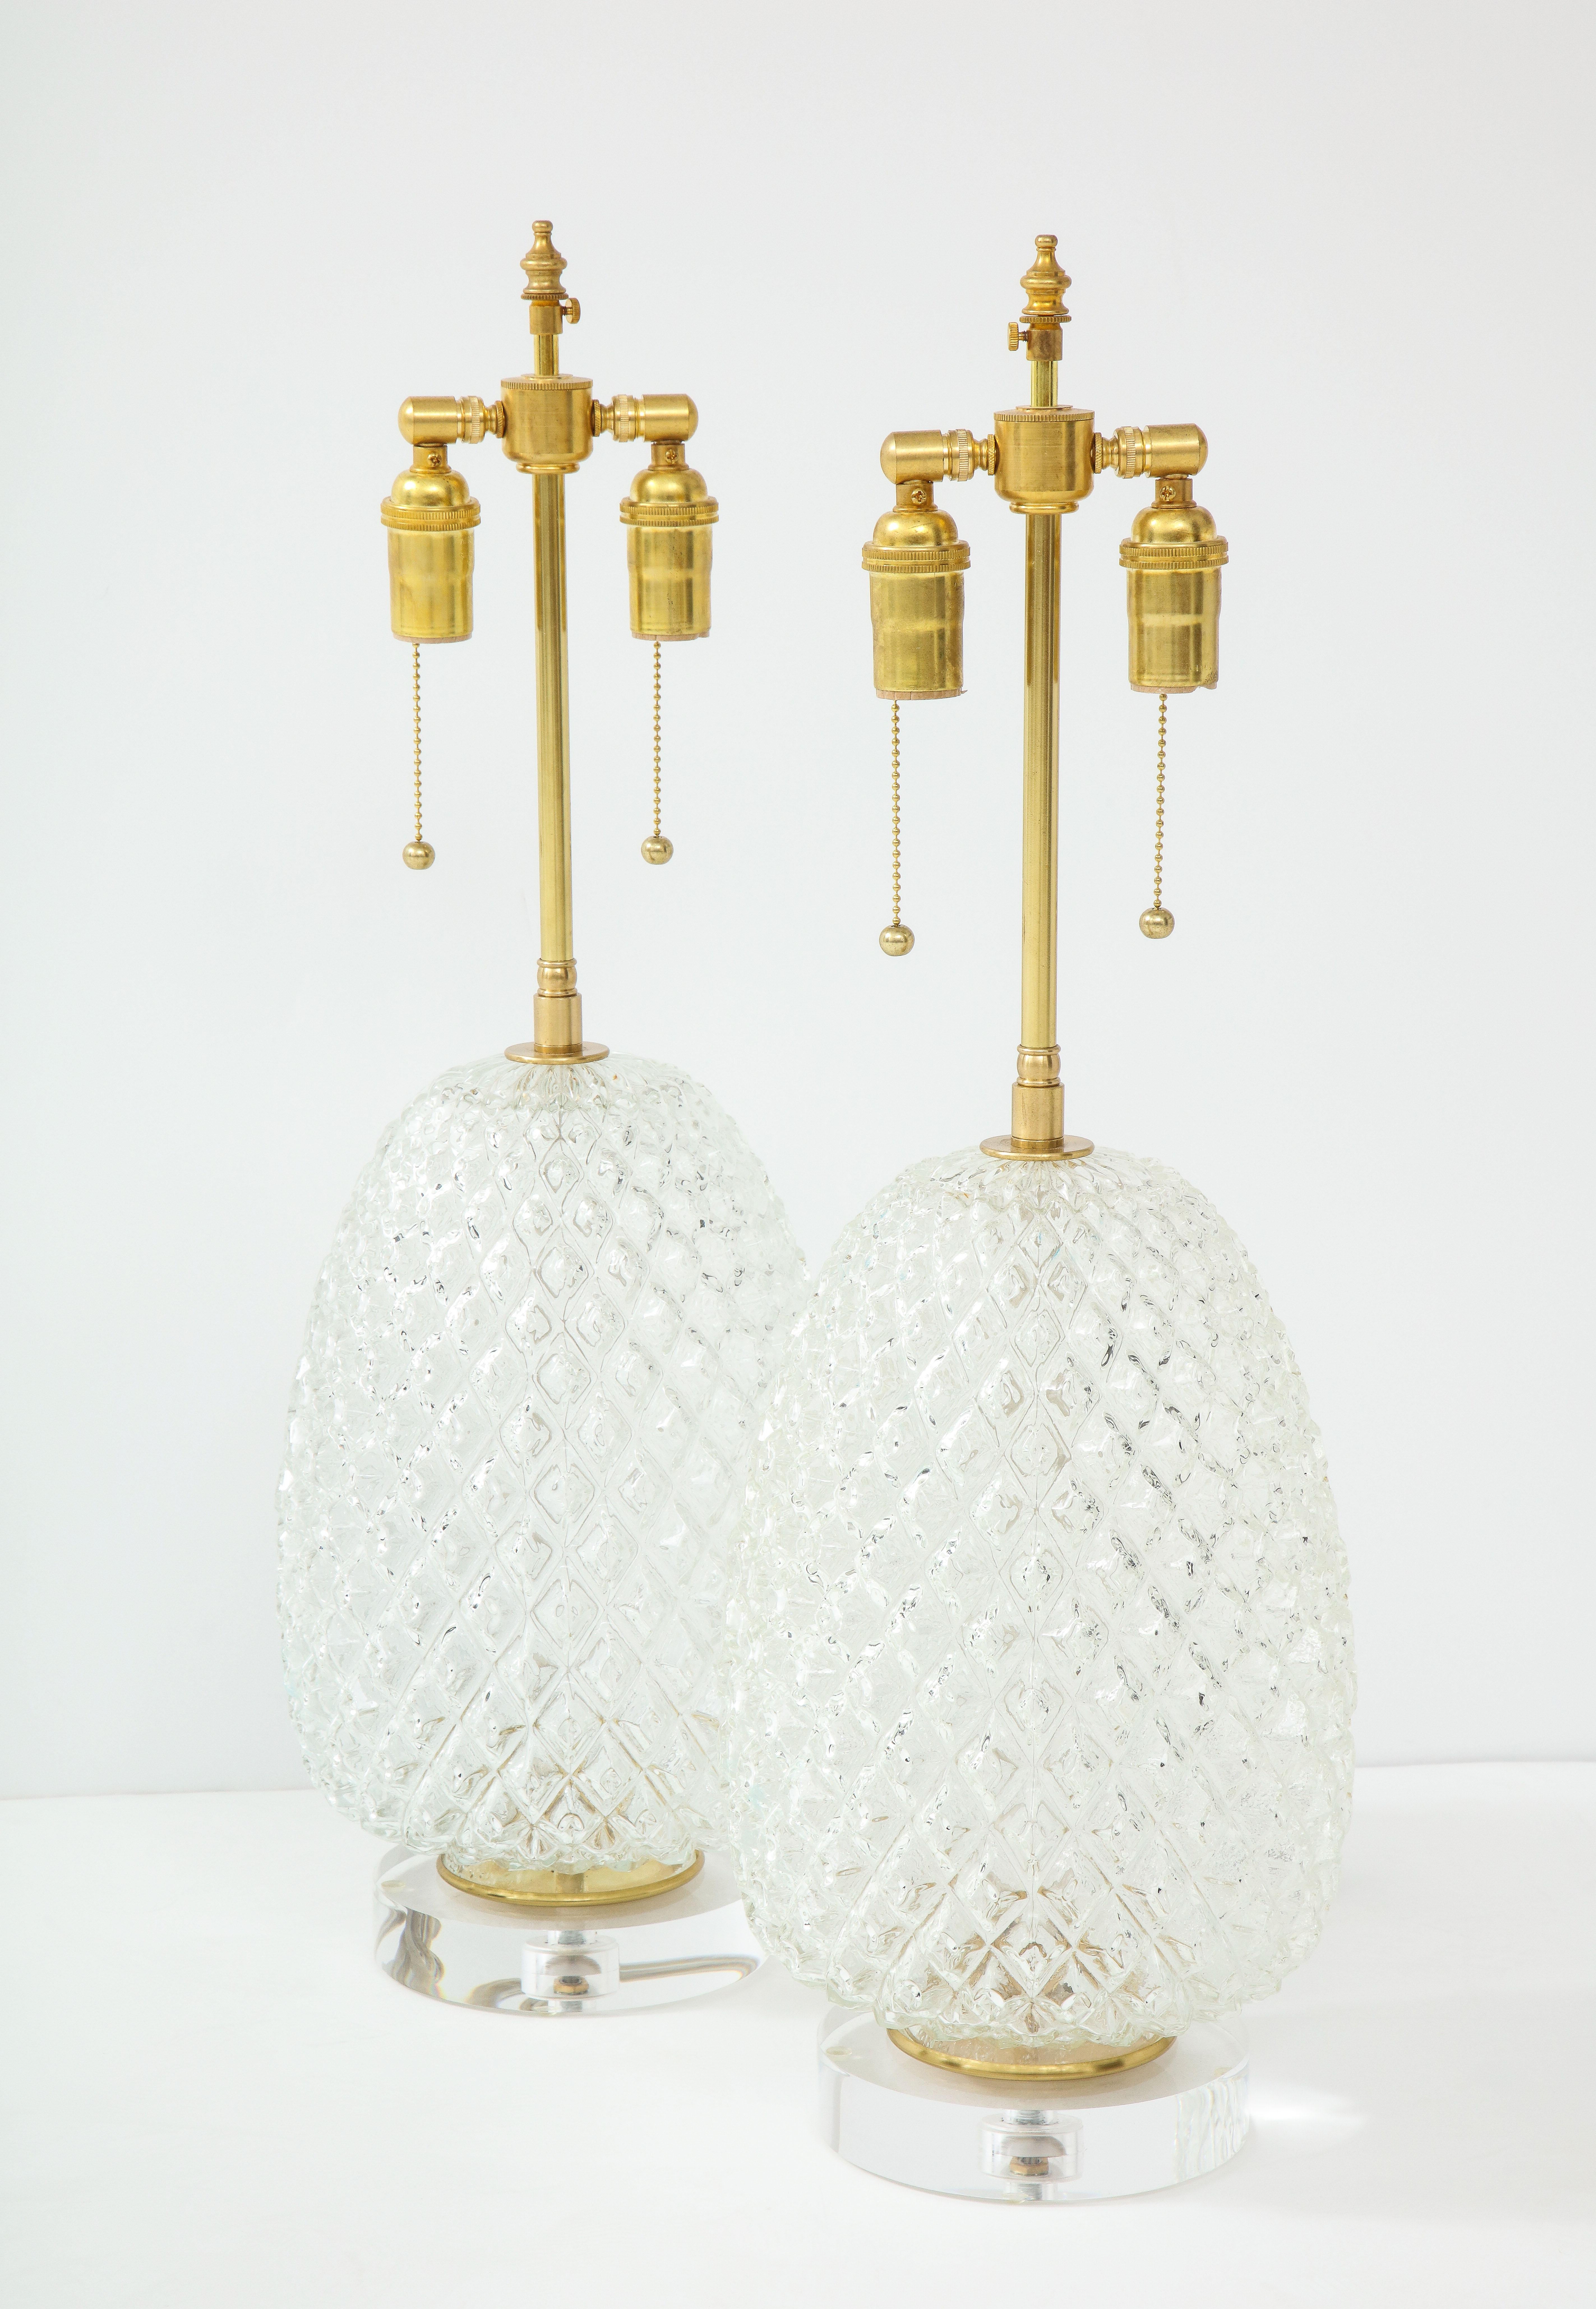 Pair of large cut glass pineapple lamps.
The glass lamp bodies sit on thick Lucite bases and they have been newly rewired
with adjustable brass double clusters that take standard size light bulbs.
The overall height is 27